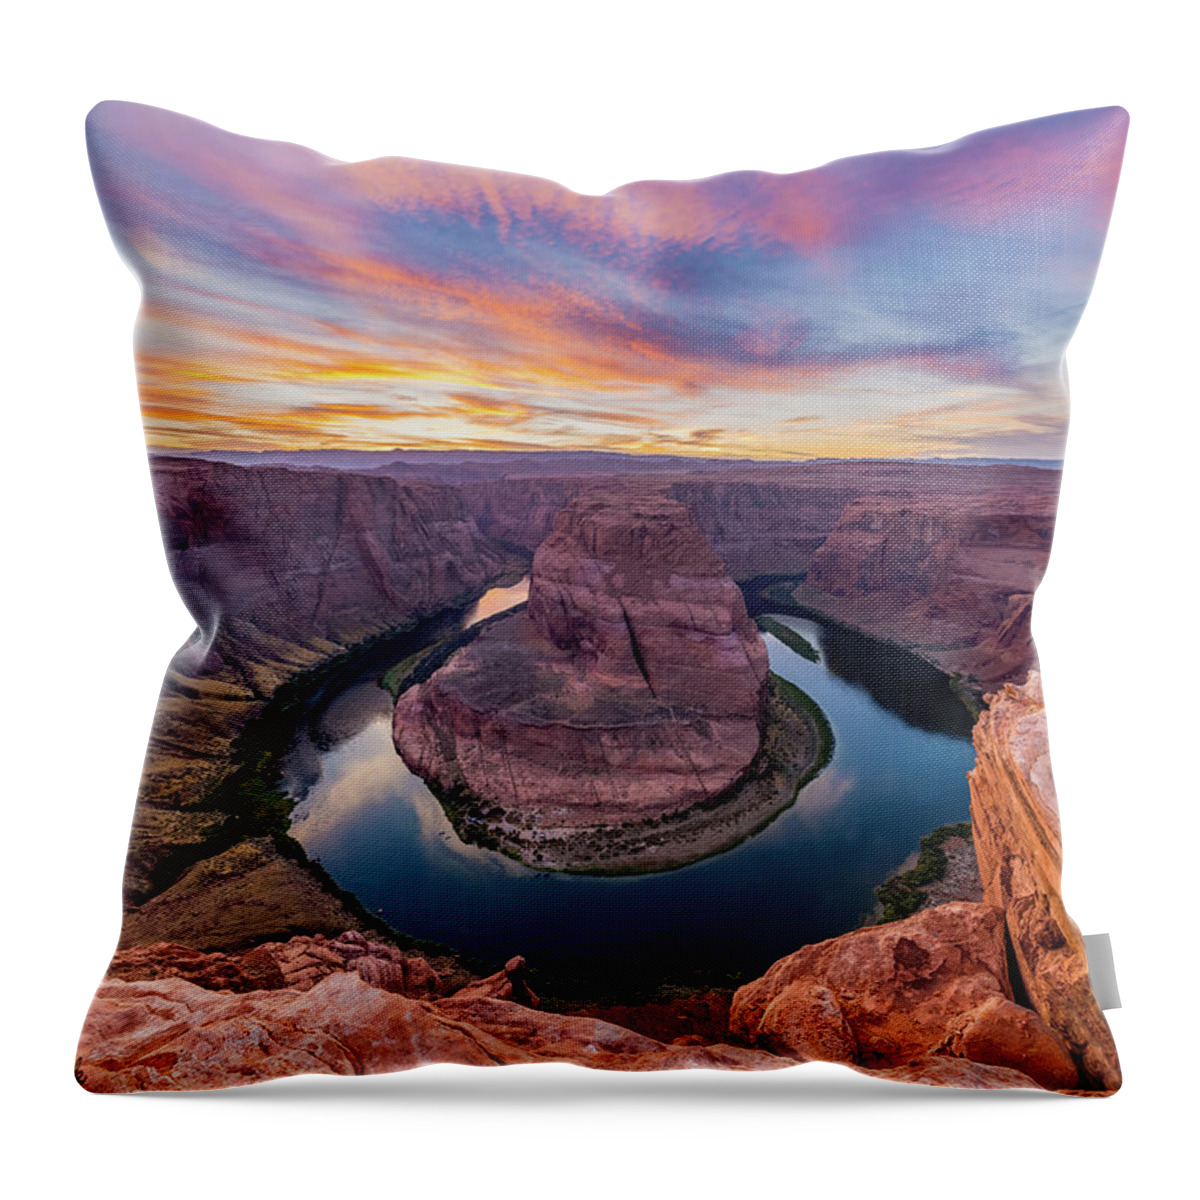 Horseshoe Bend Throw Pillow featuring the photograph Horseshoe Bend Sunset by Mike Ronnebeck